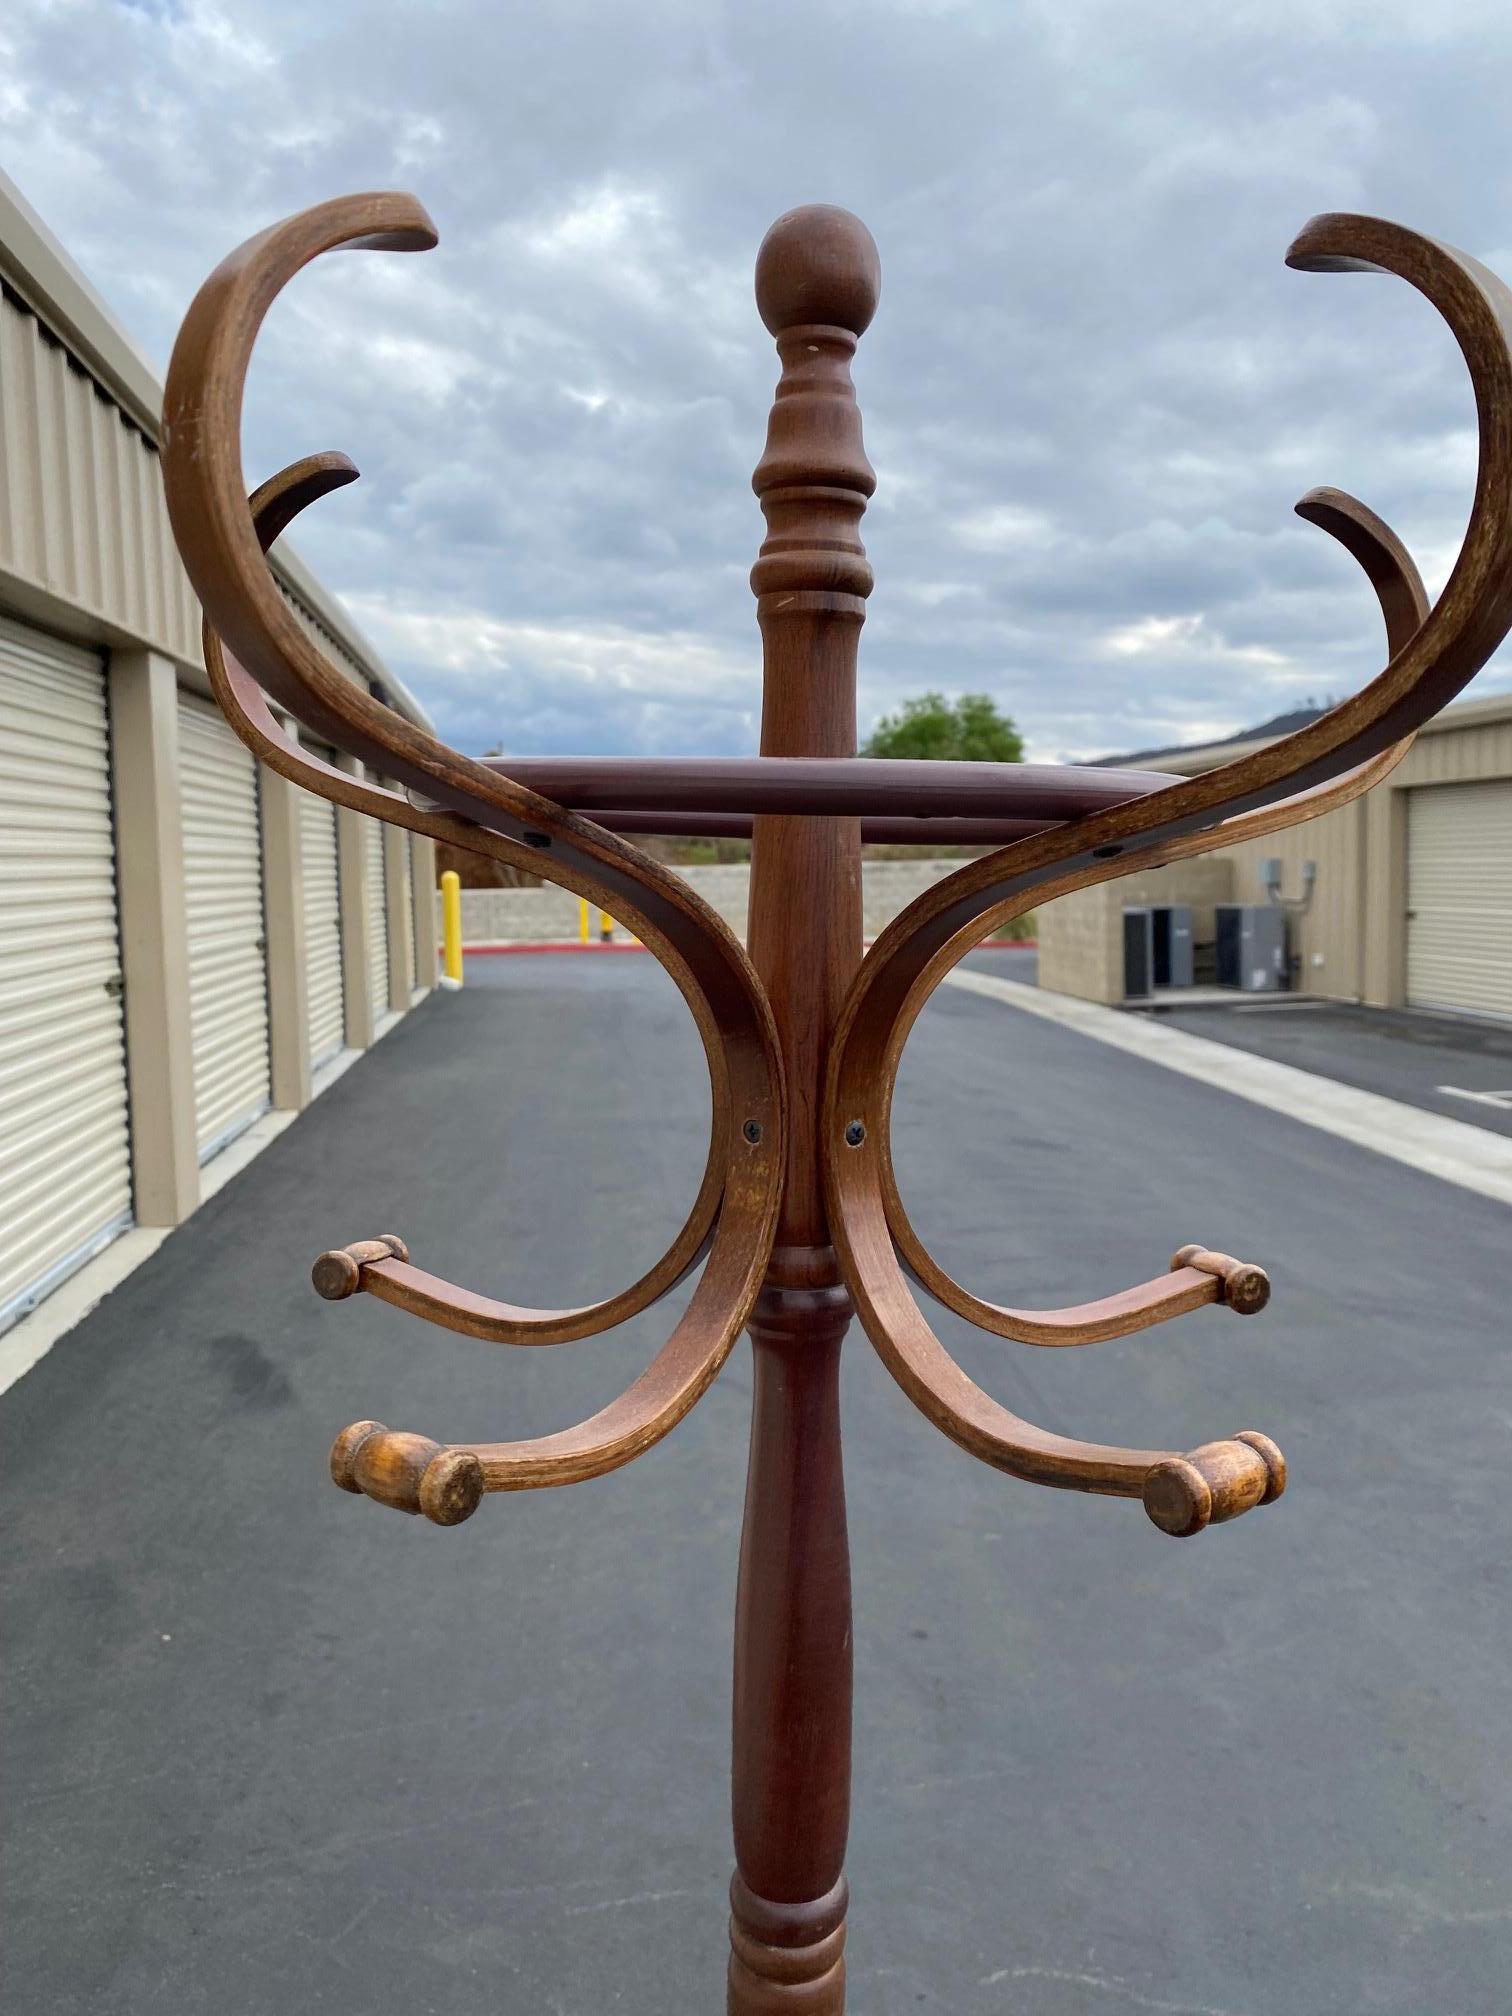 Gorgeous coatrack or coat rack, hall tree. It is 6 feet tall (72 inches) and has a revolving or spinning top. The top portion has 6 upper and 6 lower hangers. The bottom has three legs with a ring that is used for storing umbrellas. Both the upper